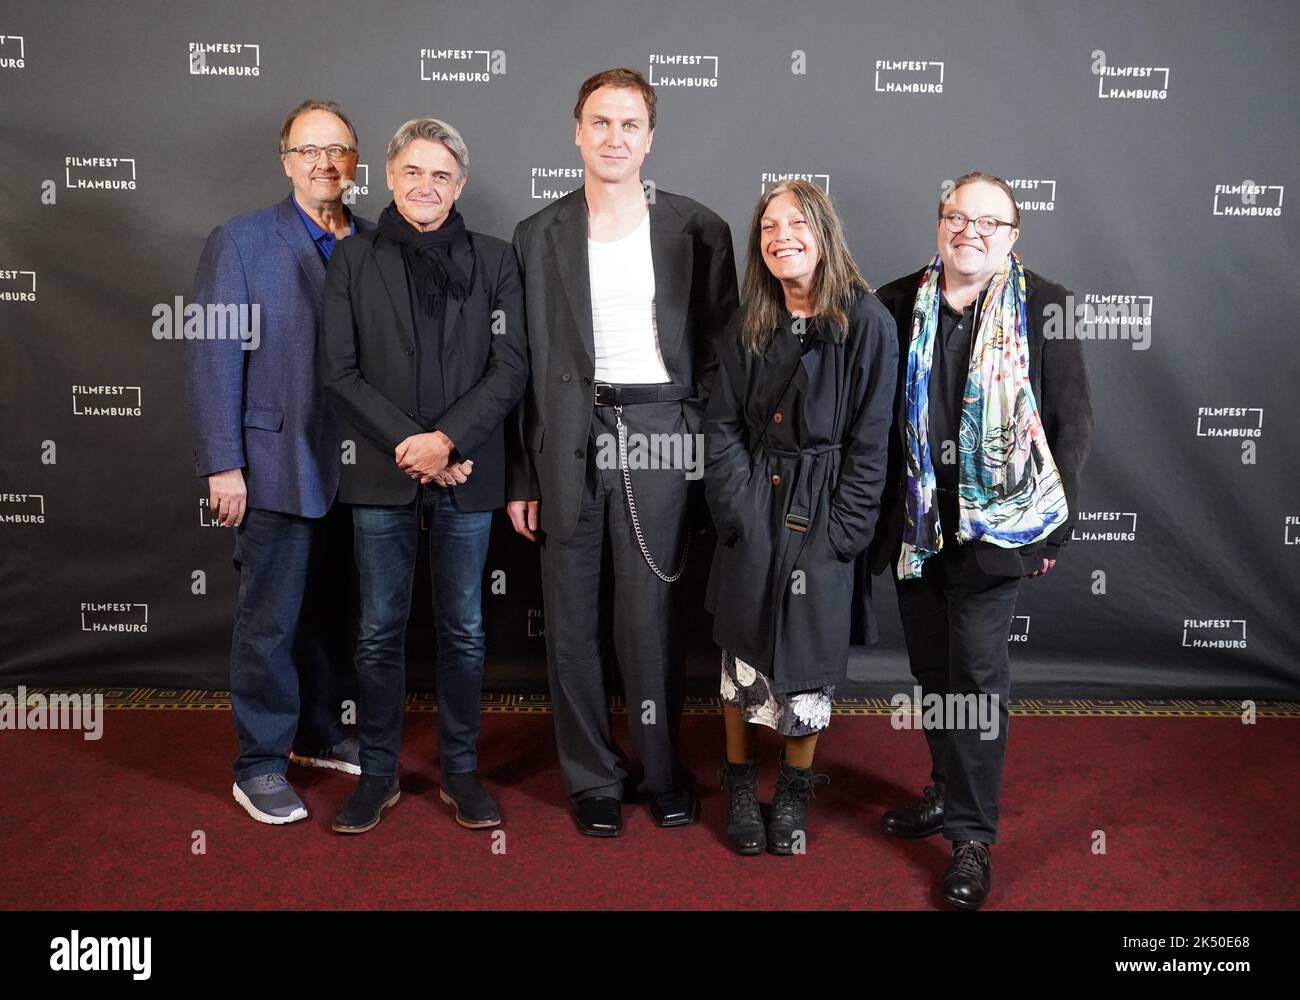 Hamburg, Germany. 04th Oct, 2022. Documentary filmmaker and director Reiner Holzemer (l-r), actor Lars Eidinger, actress Angela Winkler and actor Gustav Peter W·hler arrive at the photo call of the film 'Lars Eidinger - To be or not to be' at the Passage Kino during the 30th Filmfest Hamburg. Credit: Marcus Brandt/dpa/Alamy Live News Stock Photo